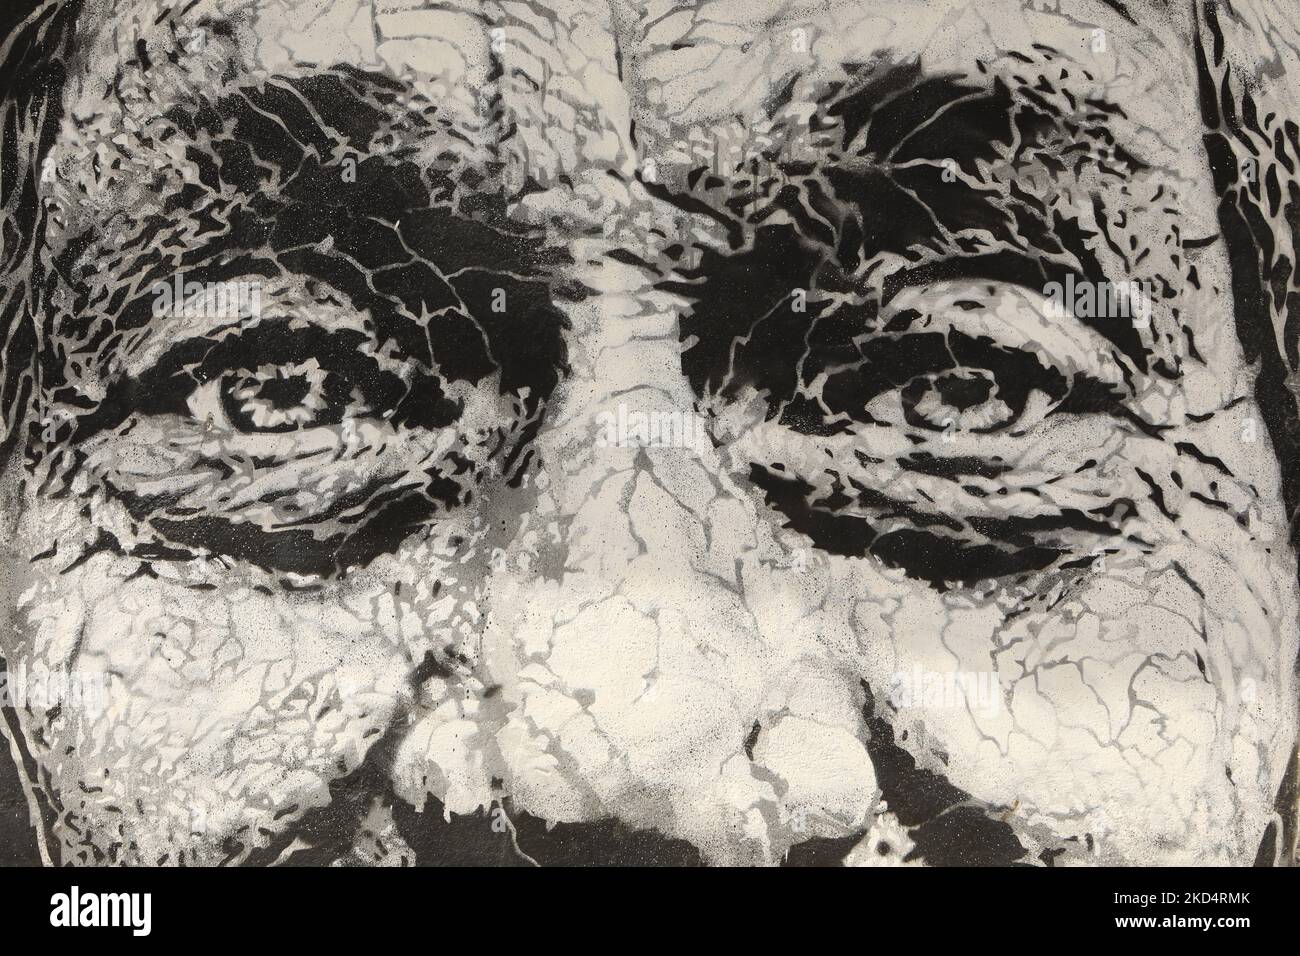 Street Art. Close up of a old mans face on a mural in old town Lagos, Algarve, Portugal Stock Photo